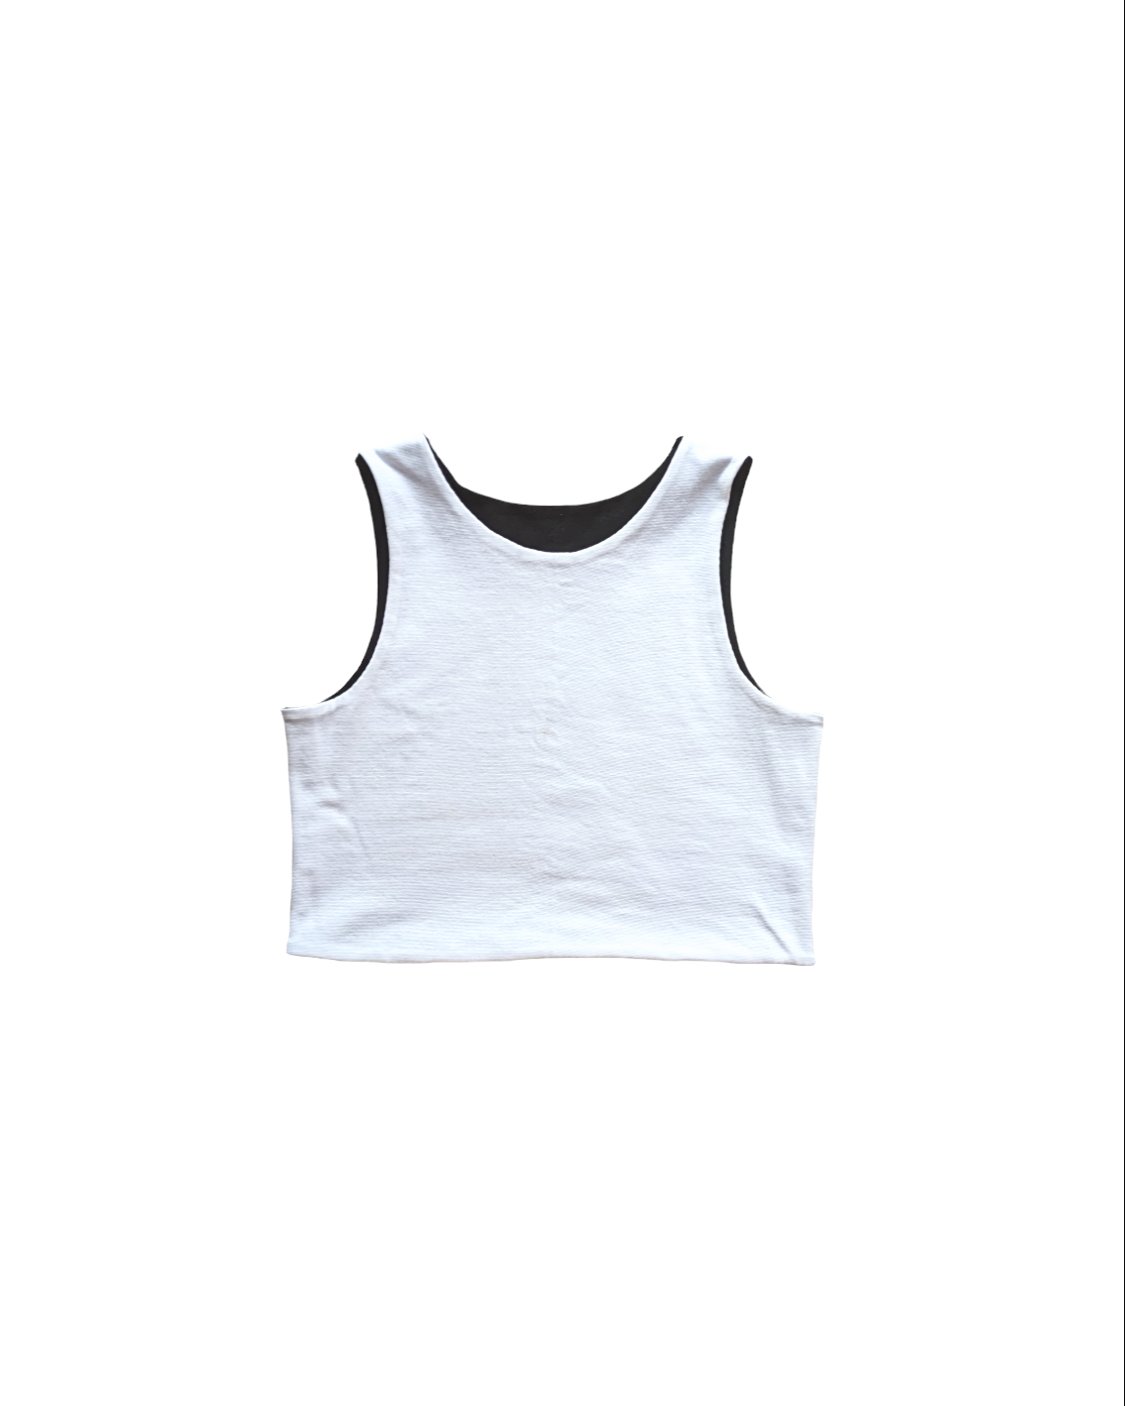 Image of CATCALL: THE REVERSIBLE CROP TOP in CHERRY